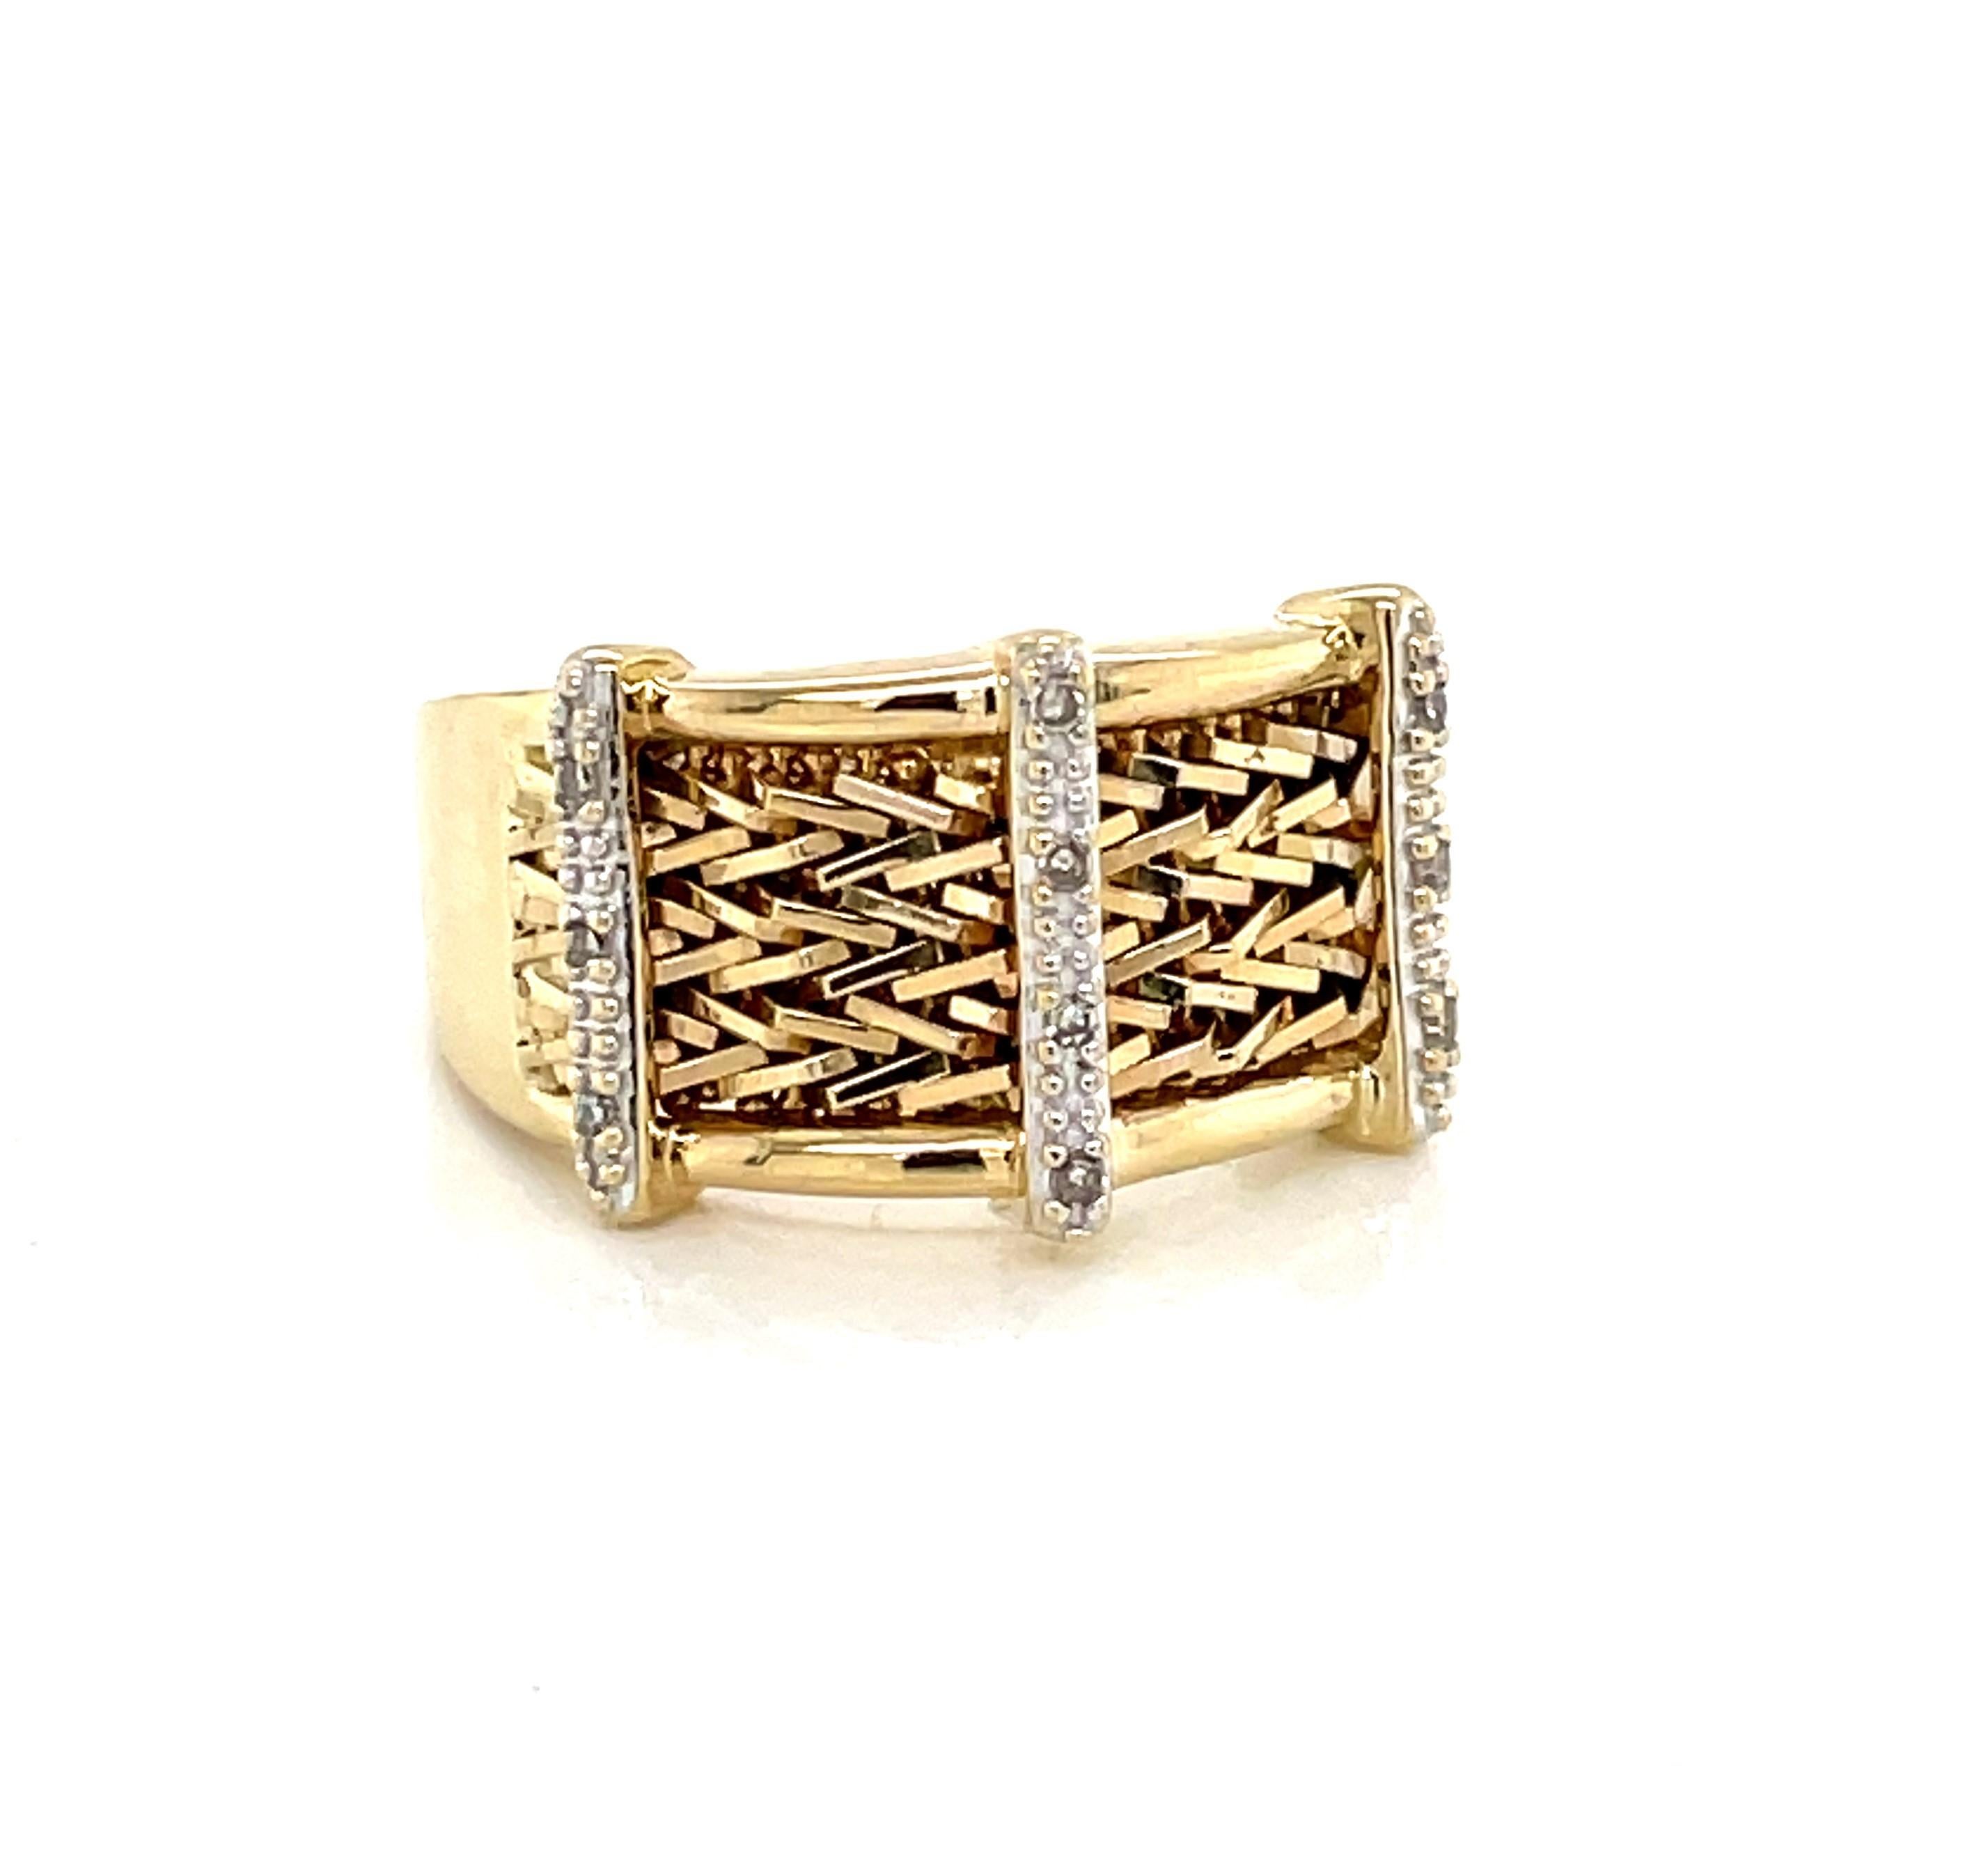 14 Karat Woven Yellow Gold Band Ring with Diamond Accents For Sale 2